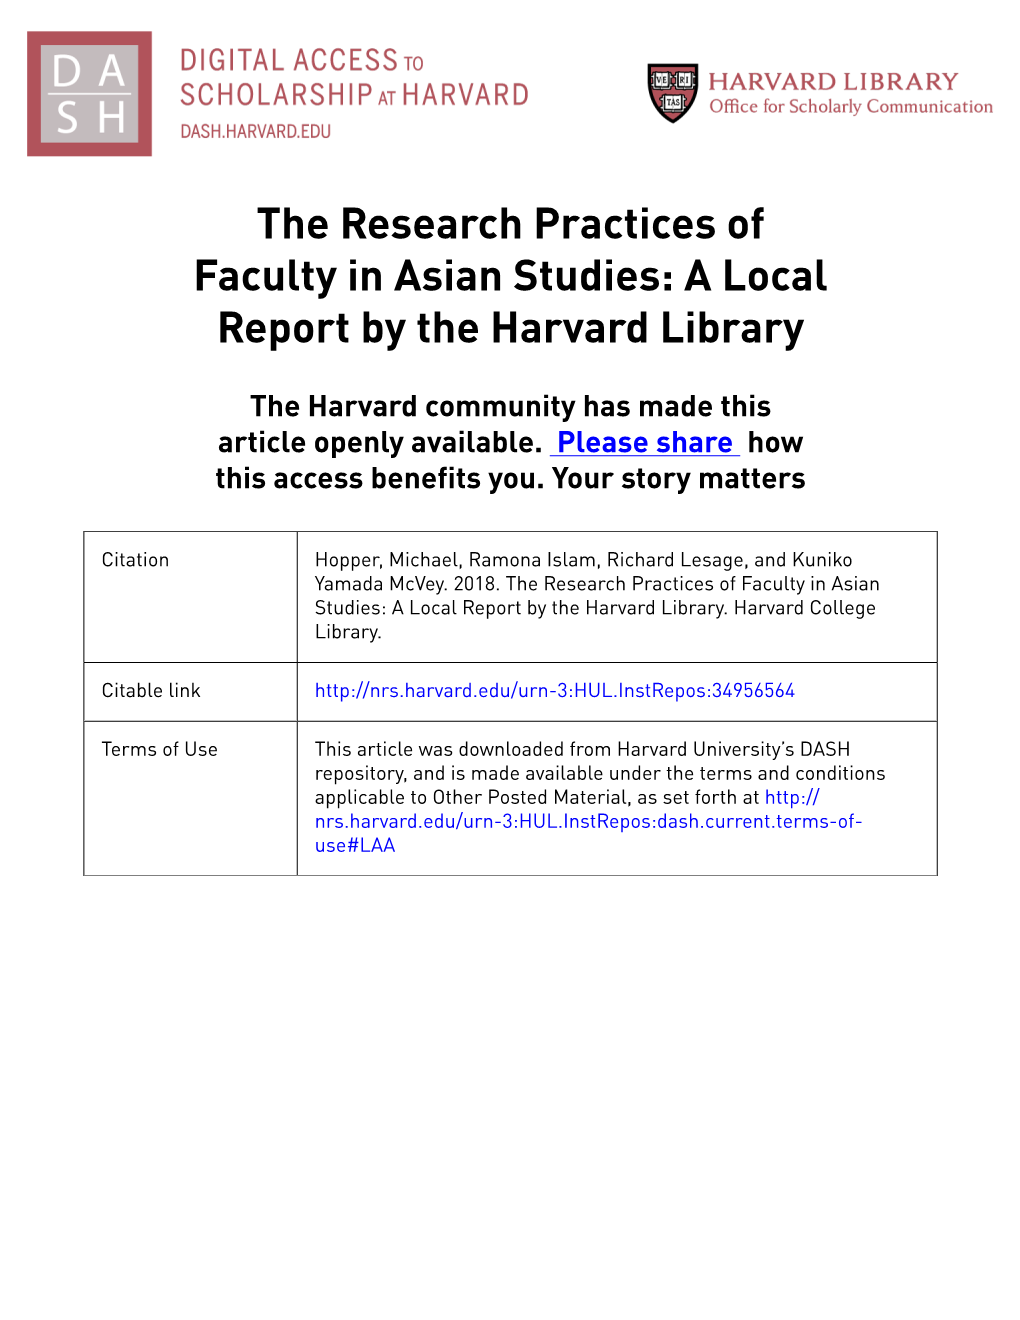 The Research Practices of Faculty in Asian Studies: a Local Report by the Harvard Library